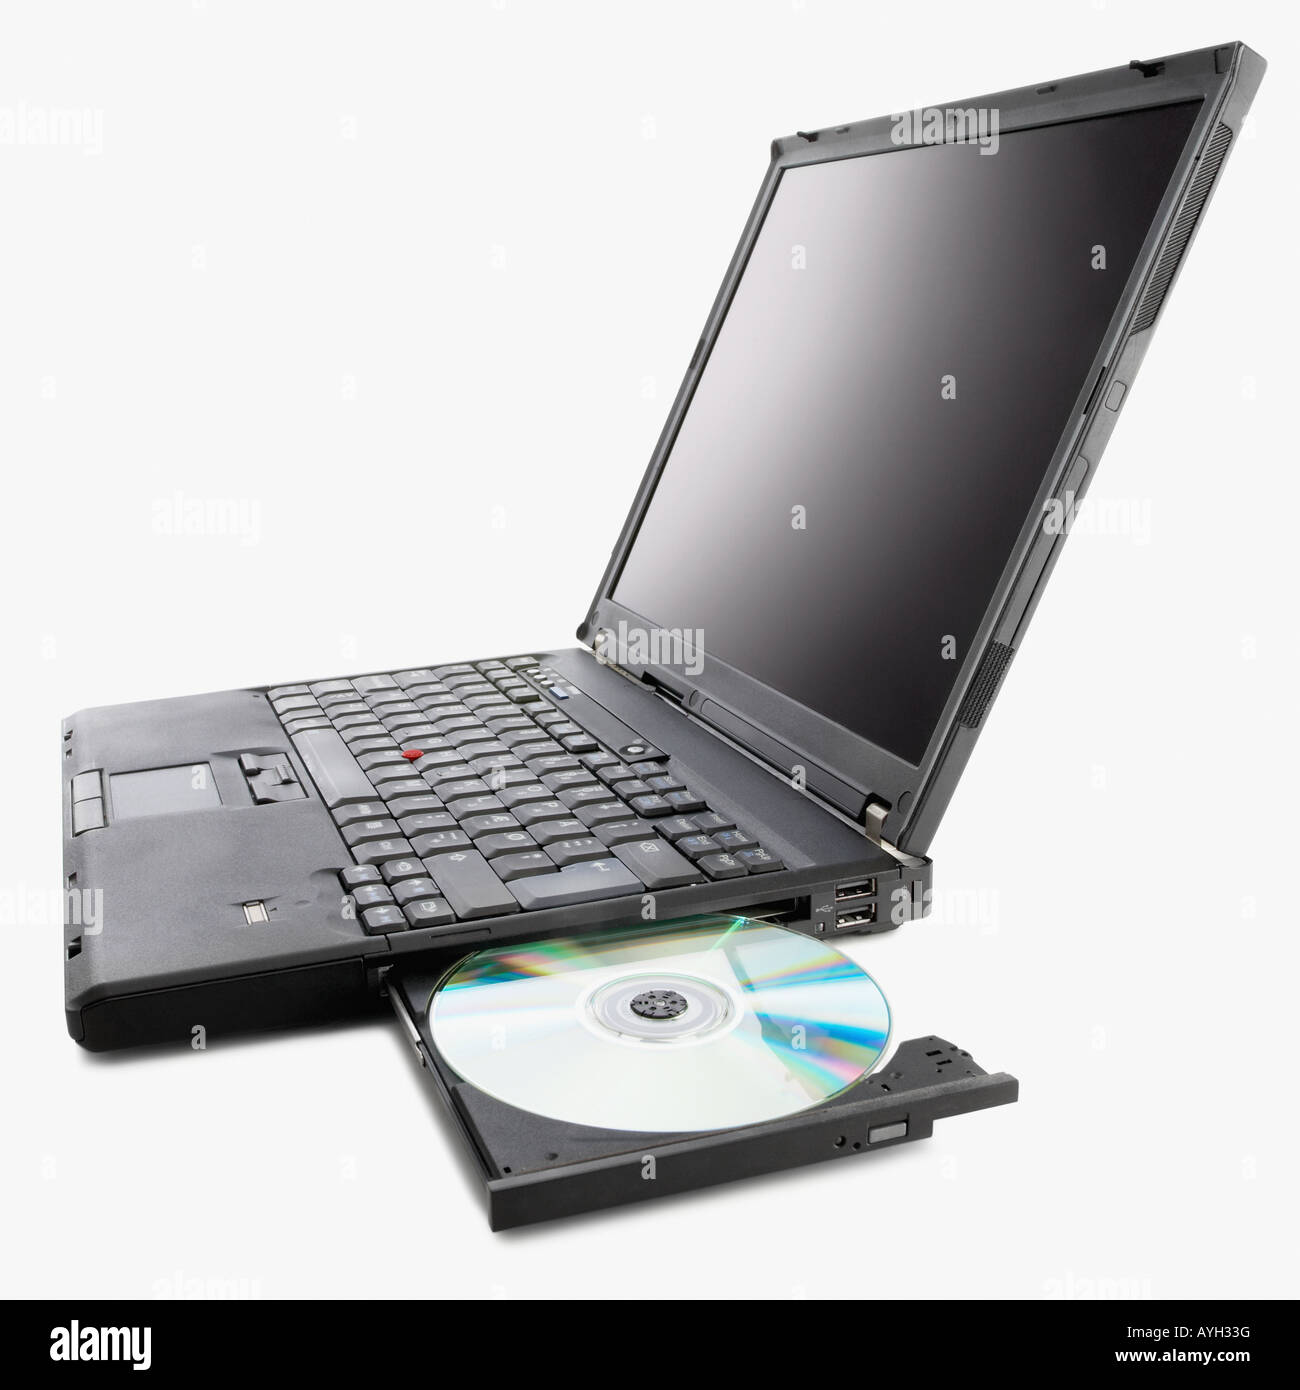 Laptop with cd rom drive open Stock Photo - Alamy